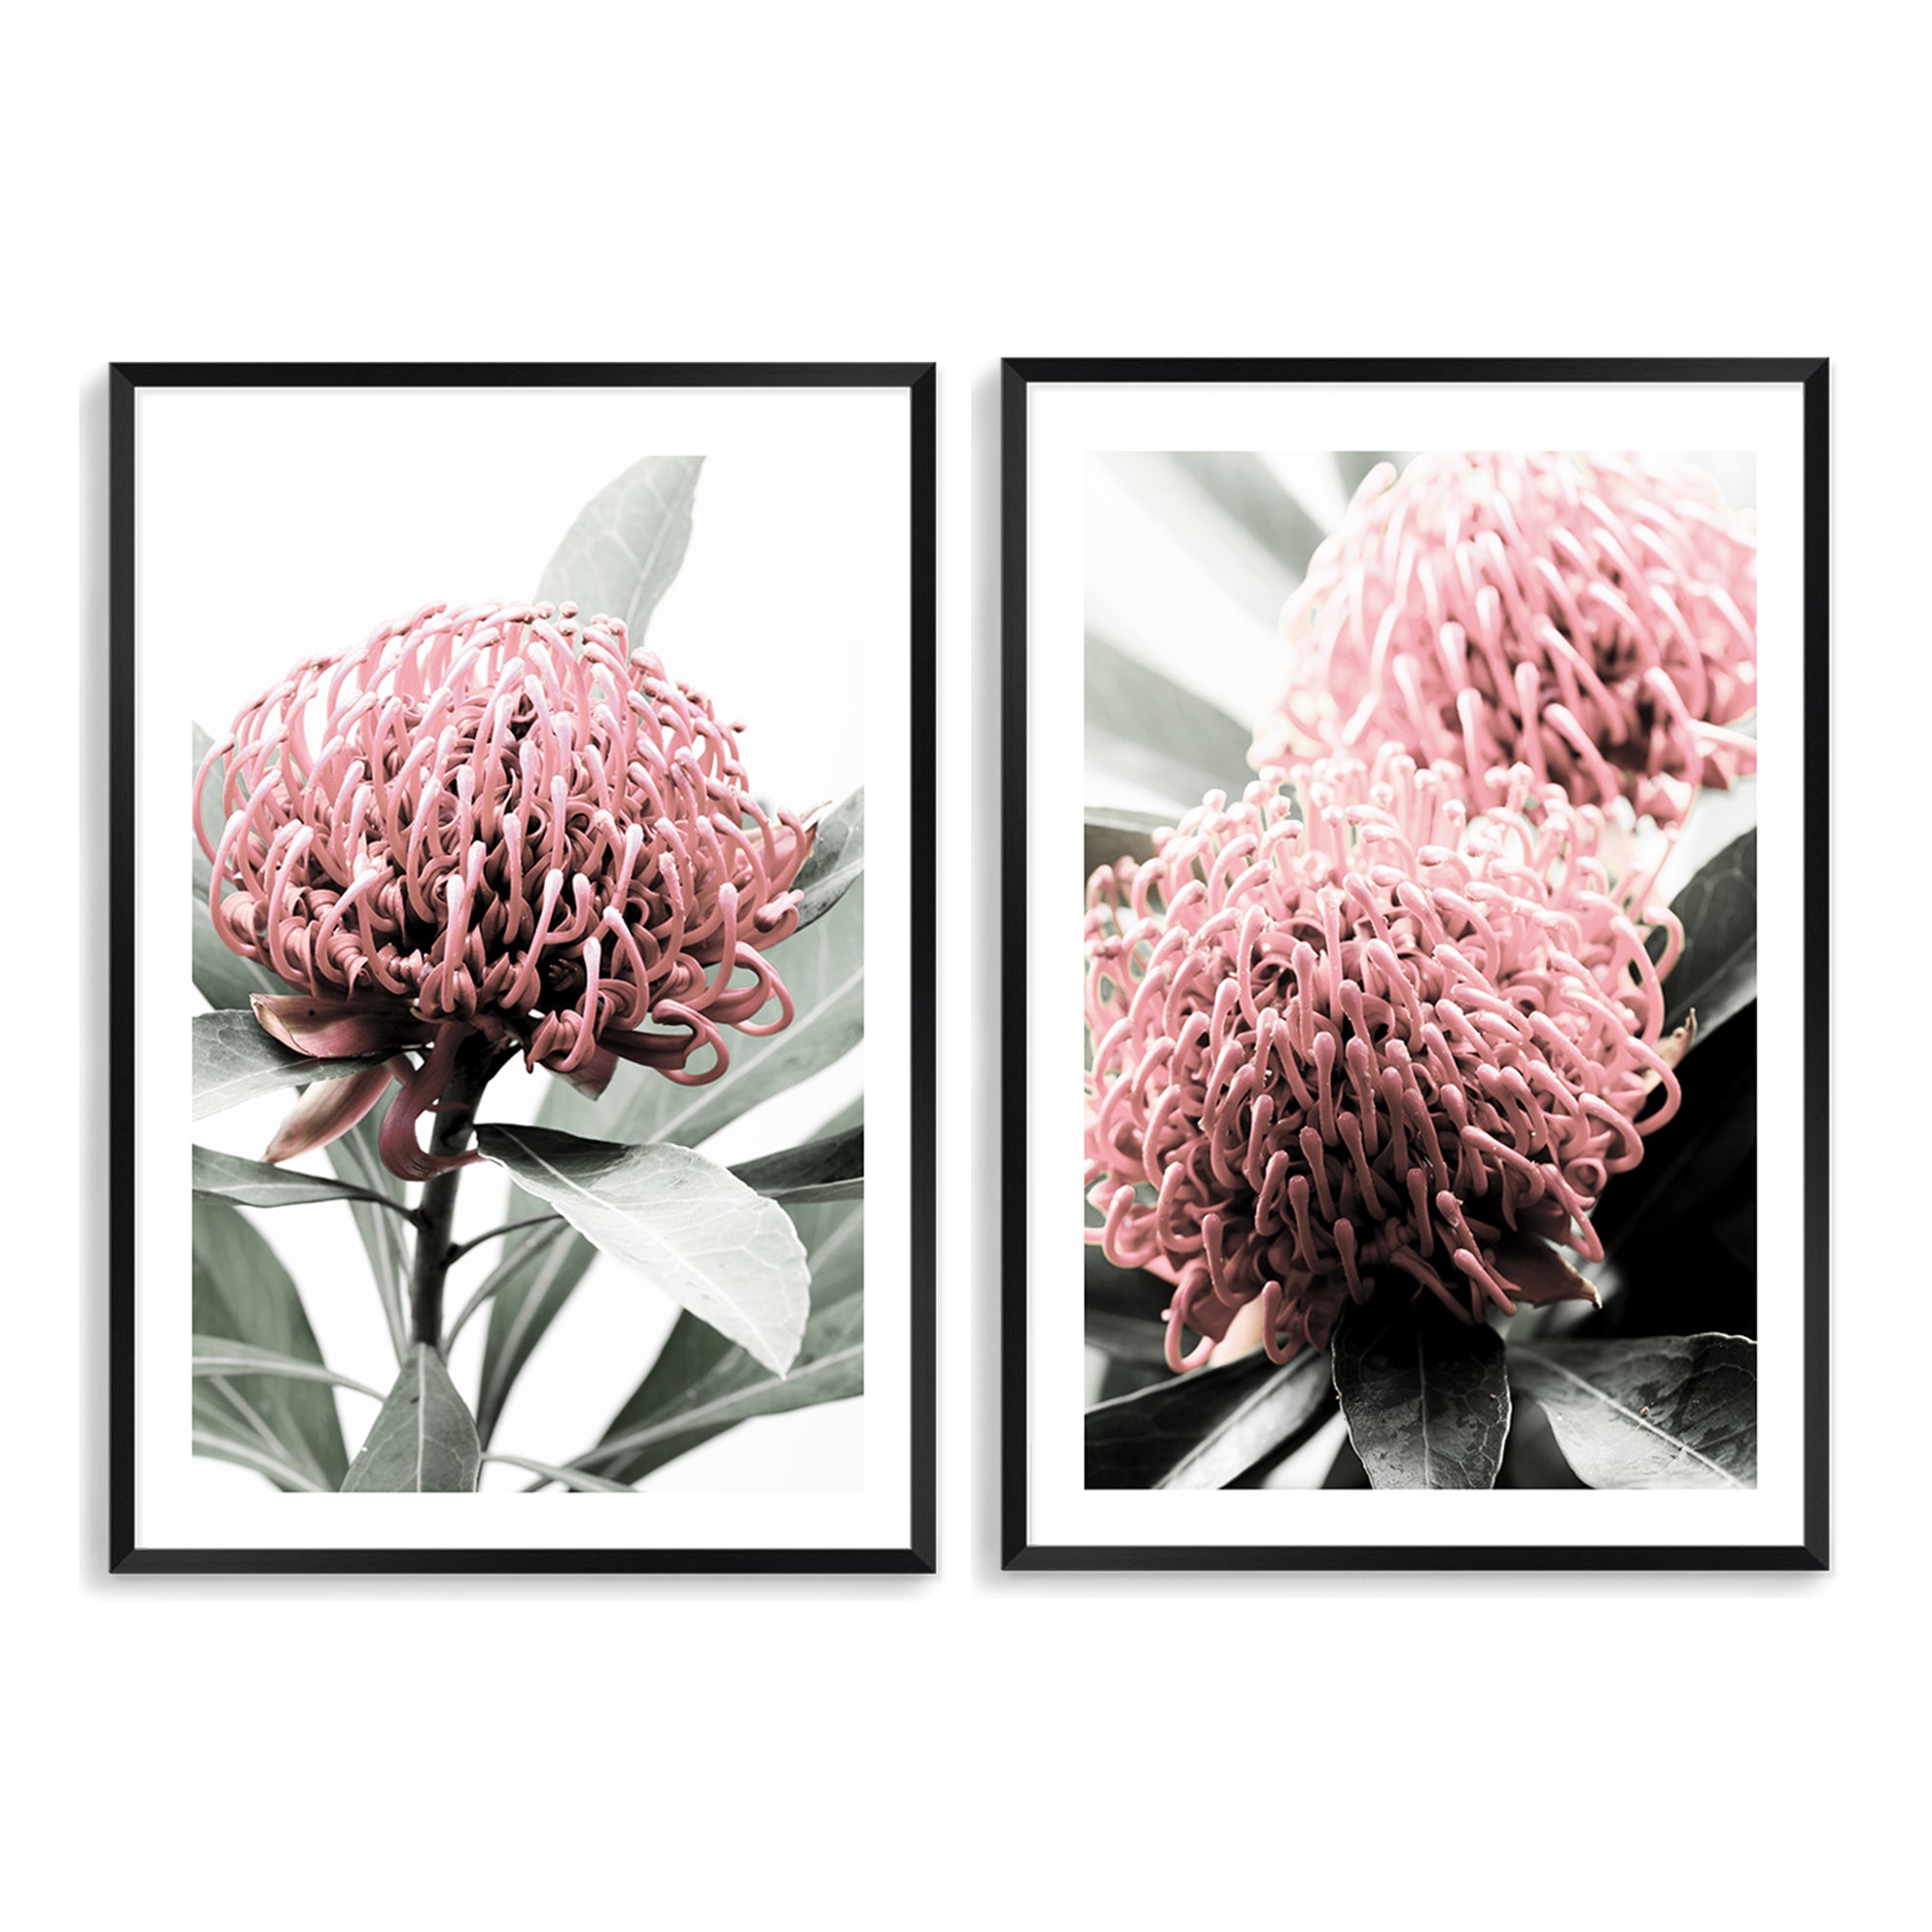 An wall art set of 2 prints featuring the beautiful reds and green of the Australian native Waratah flower.